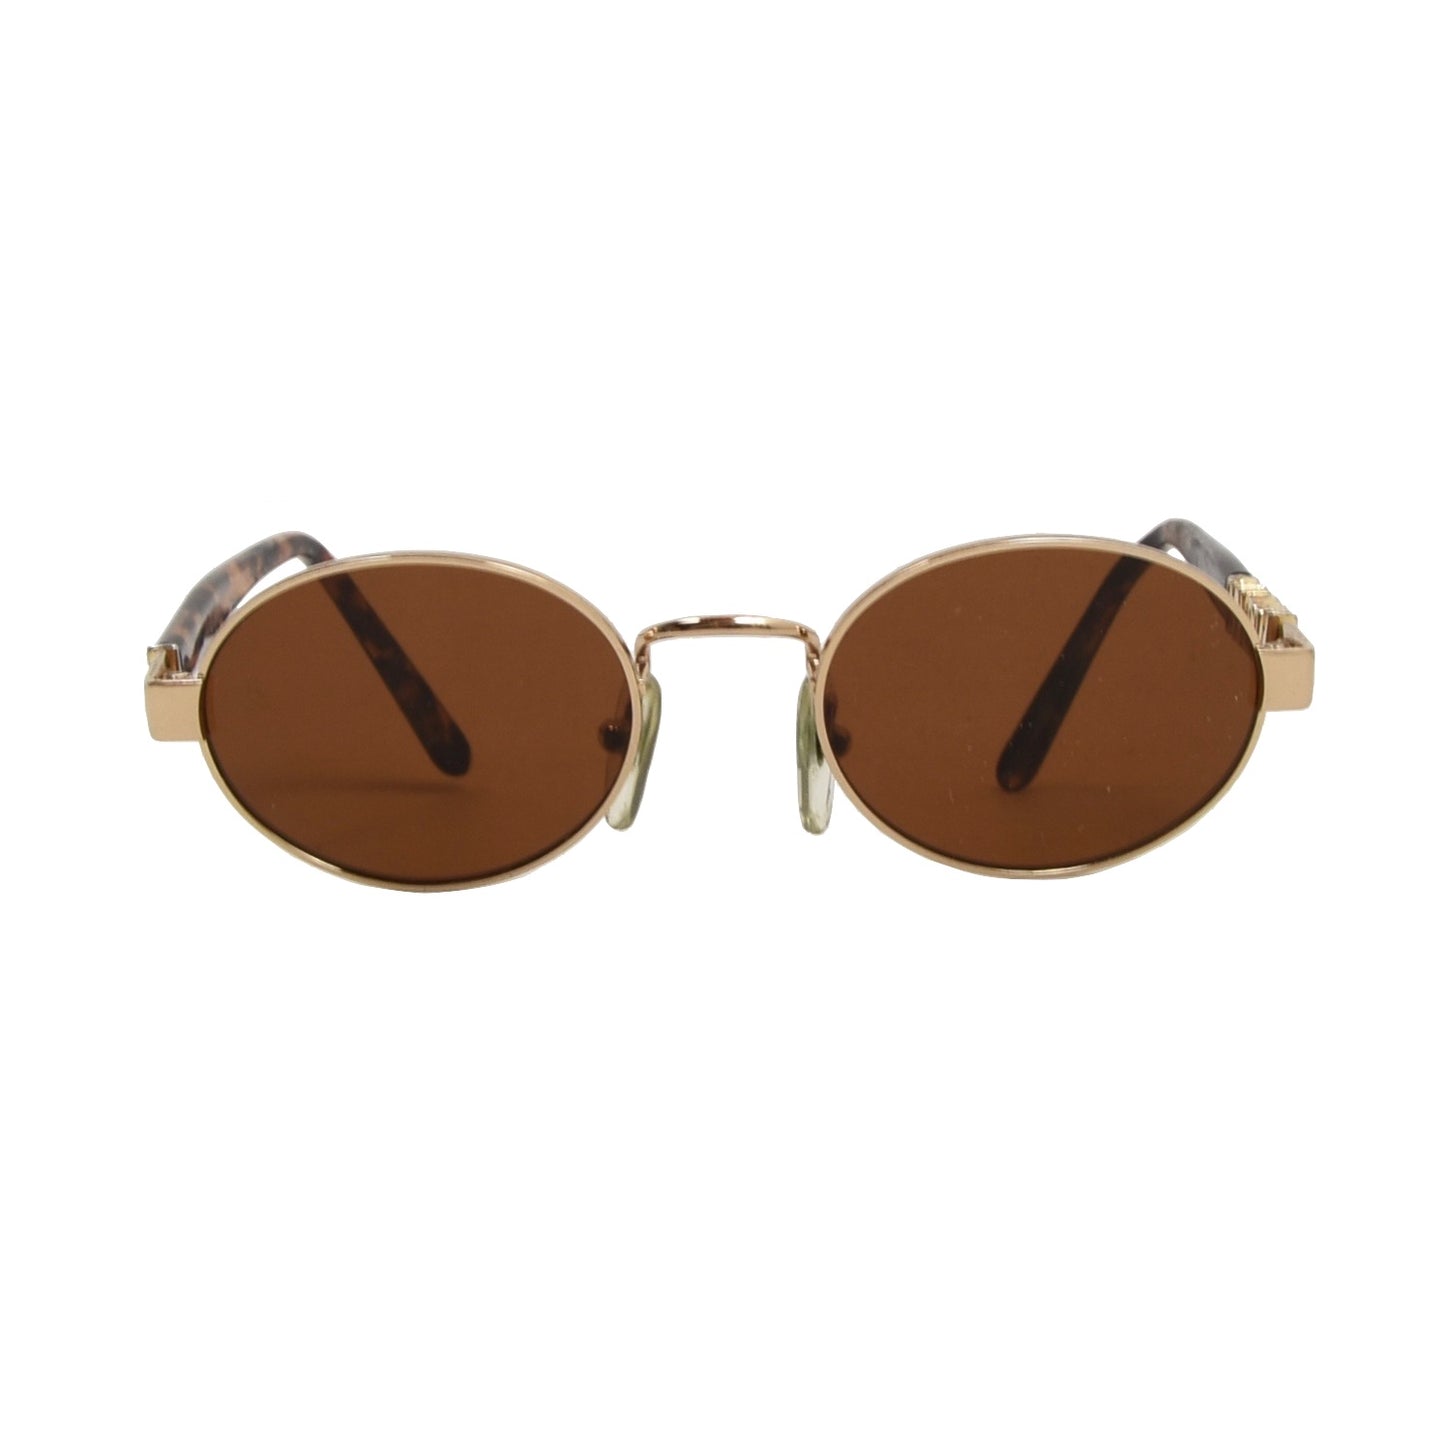 Moschino x Persol MM523 Spellout Sunglasses - Gold & Tortoise